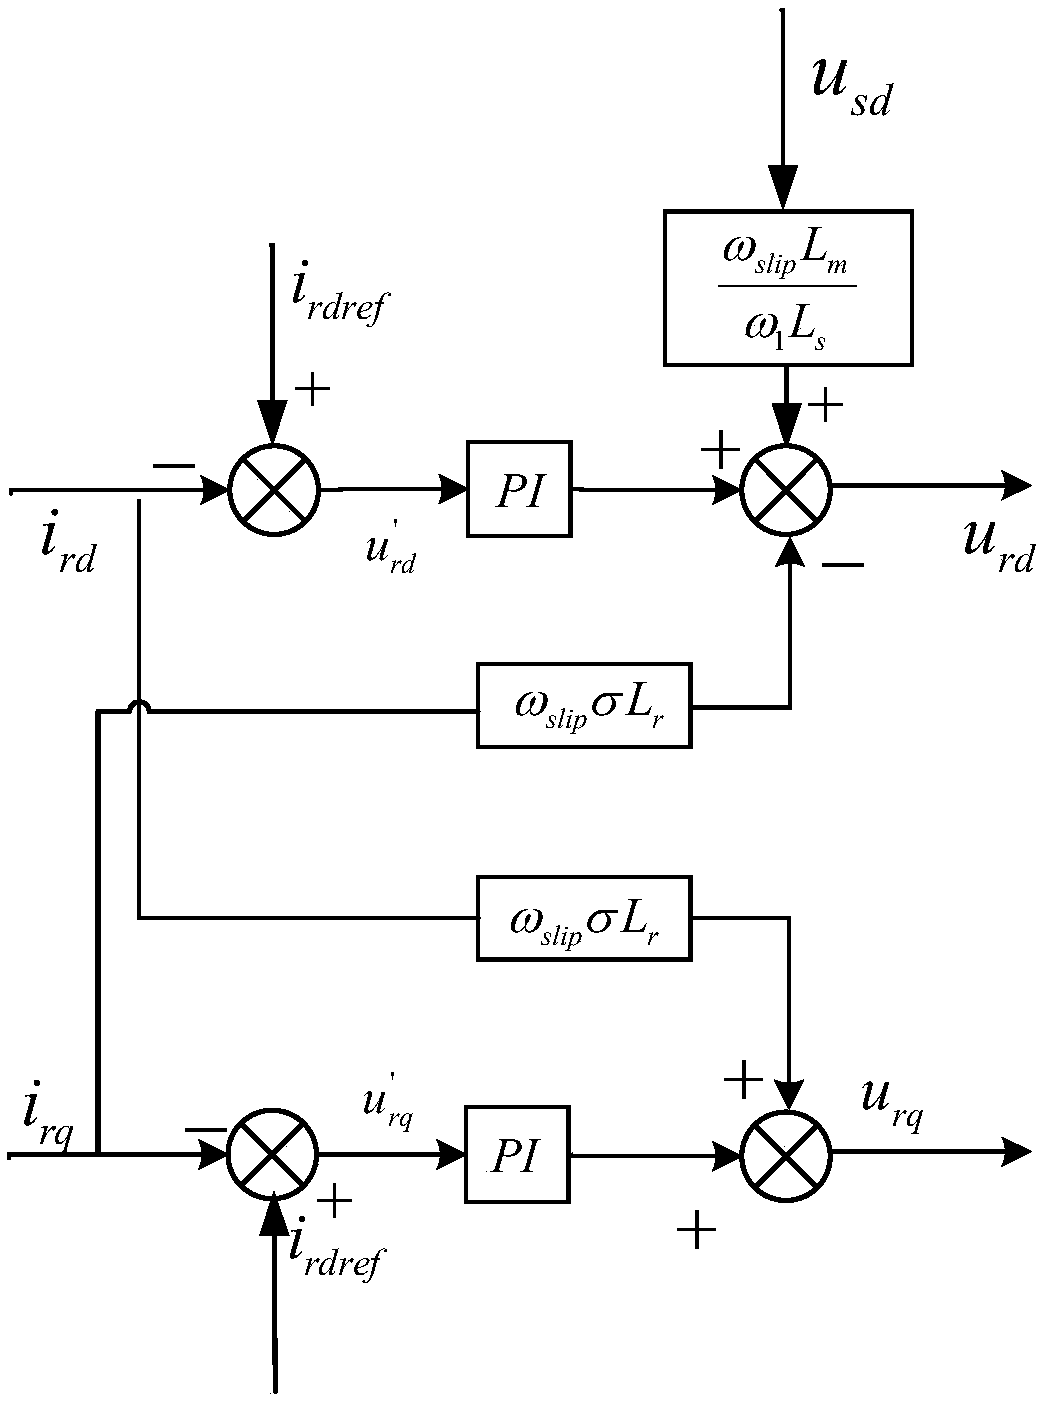 Stability analysis method of rotor-side converter of doubly-fed fan based on speed control